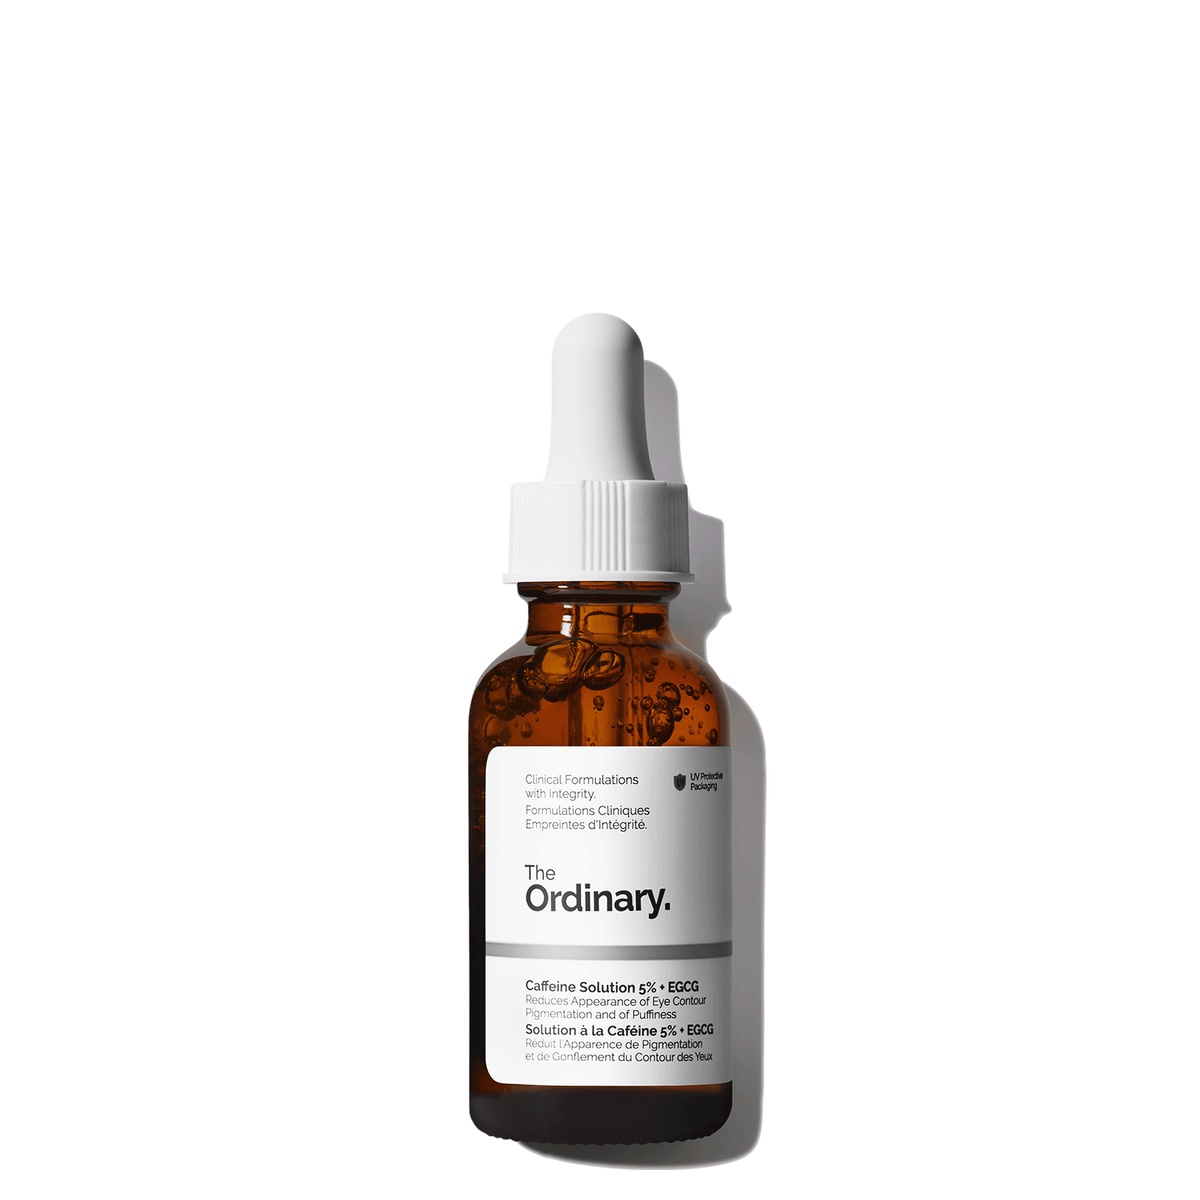 The Ordinary Caffeine Solution 5% + Egcg 30ml for reducing puffiness and dark circles